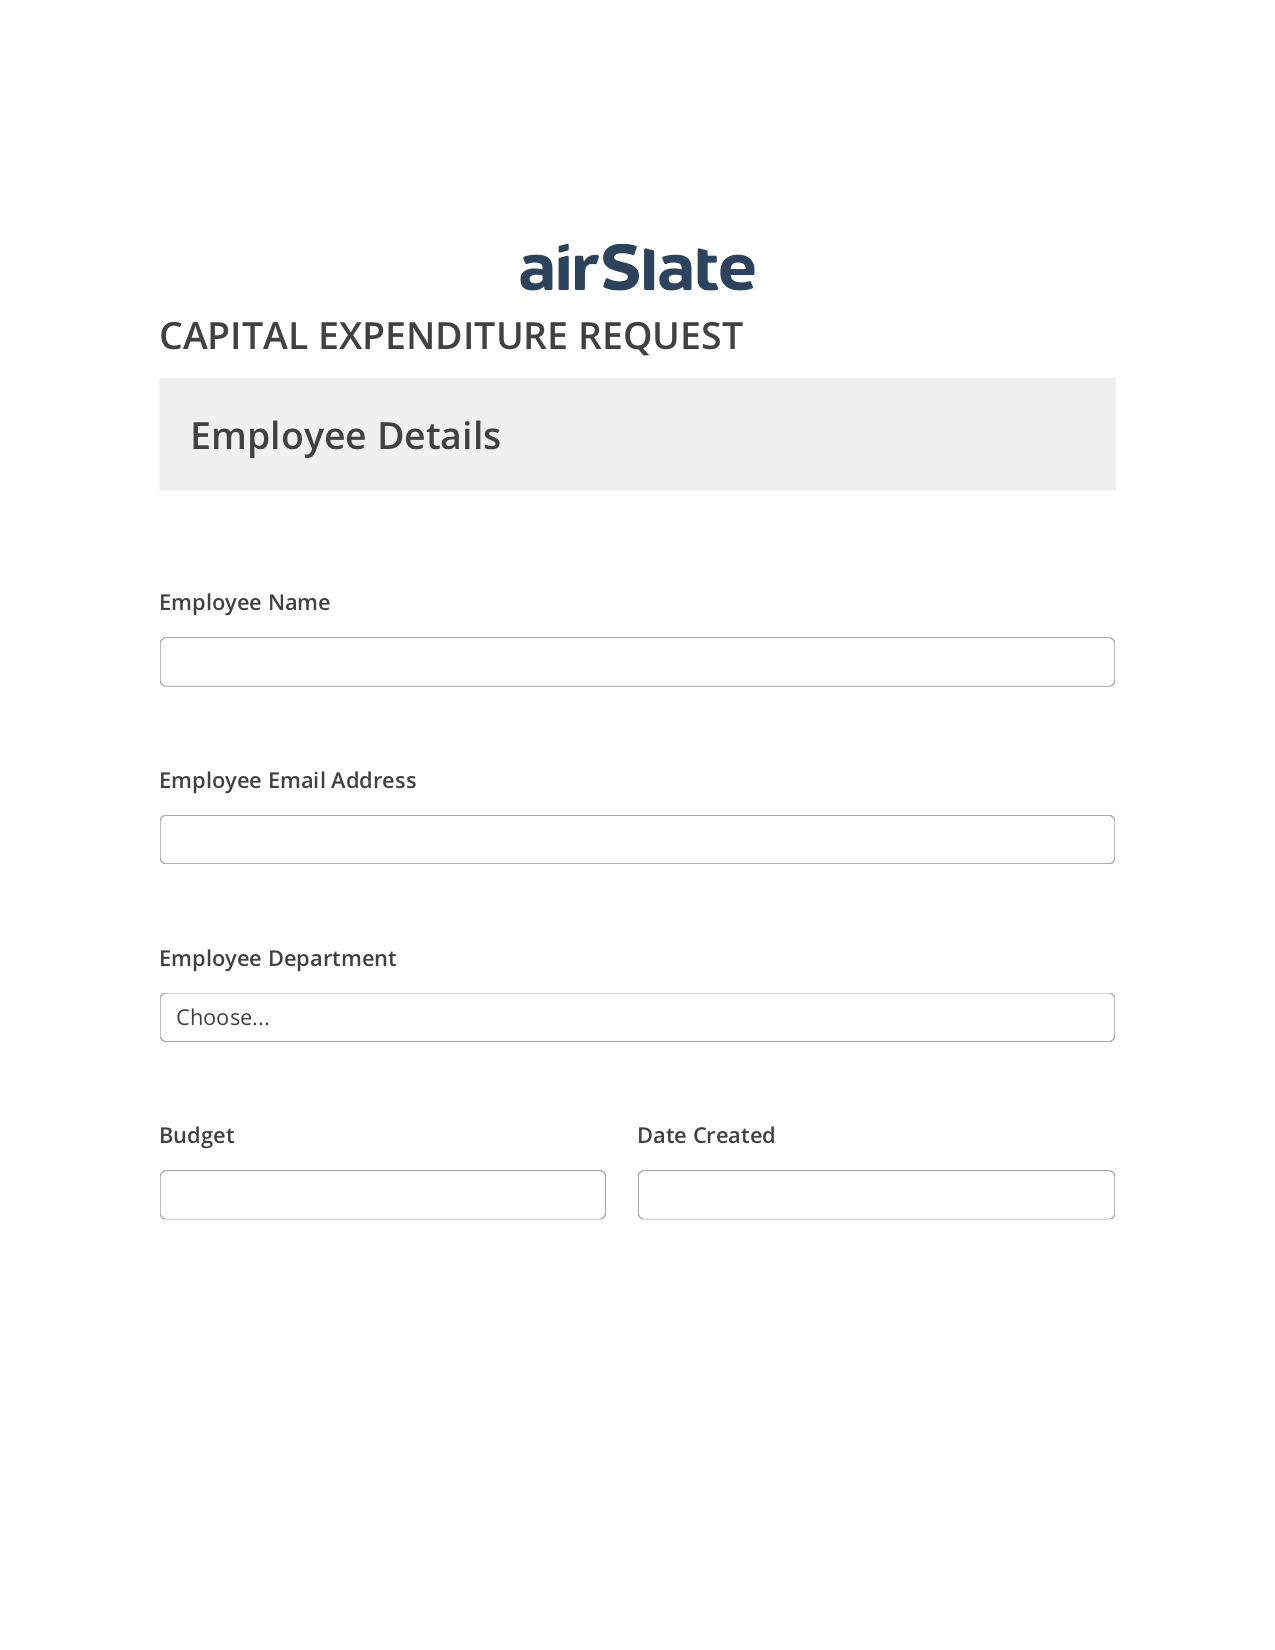 Multirole Capital Expenditure Request Approval Workflow Pre-fill from Google Sheet Dropdown Options Bot, Create slate addon, Archive to Google Drive Bot